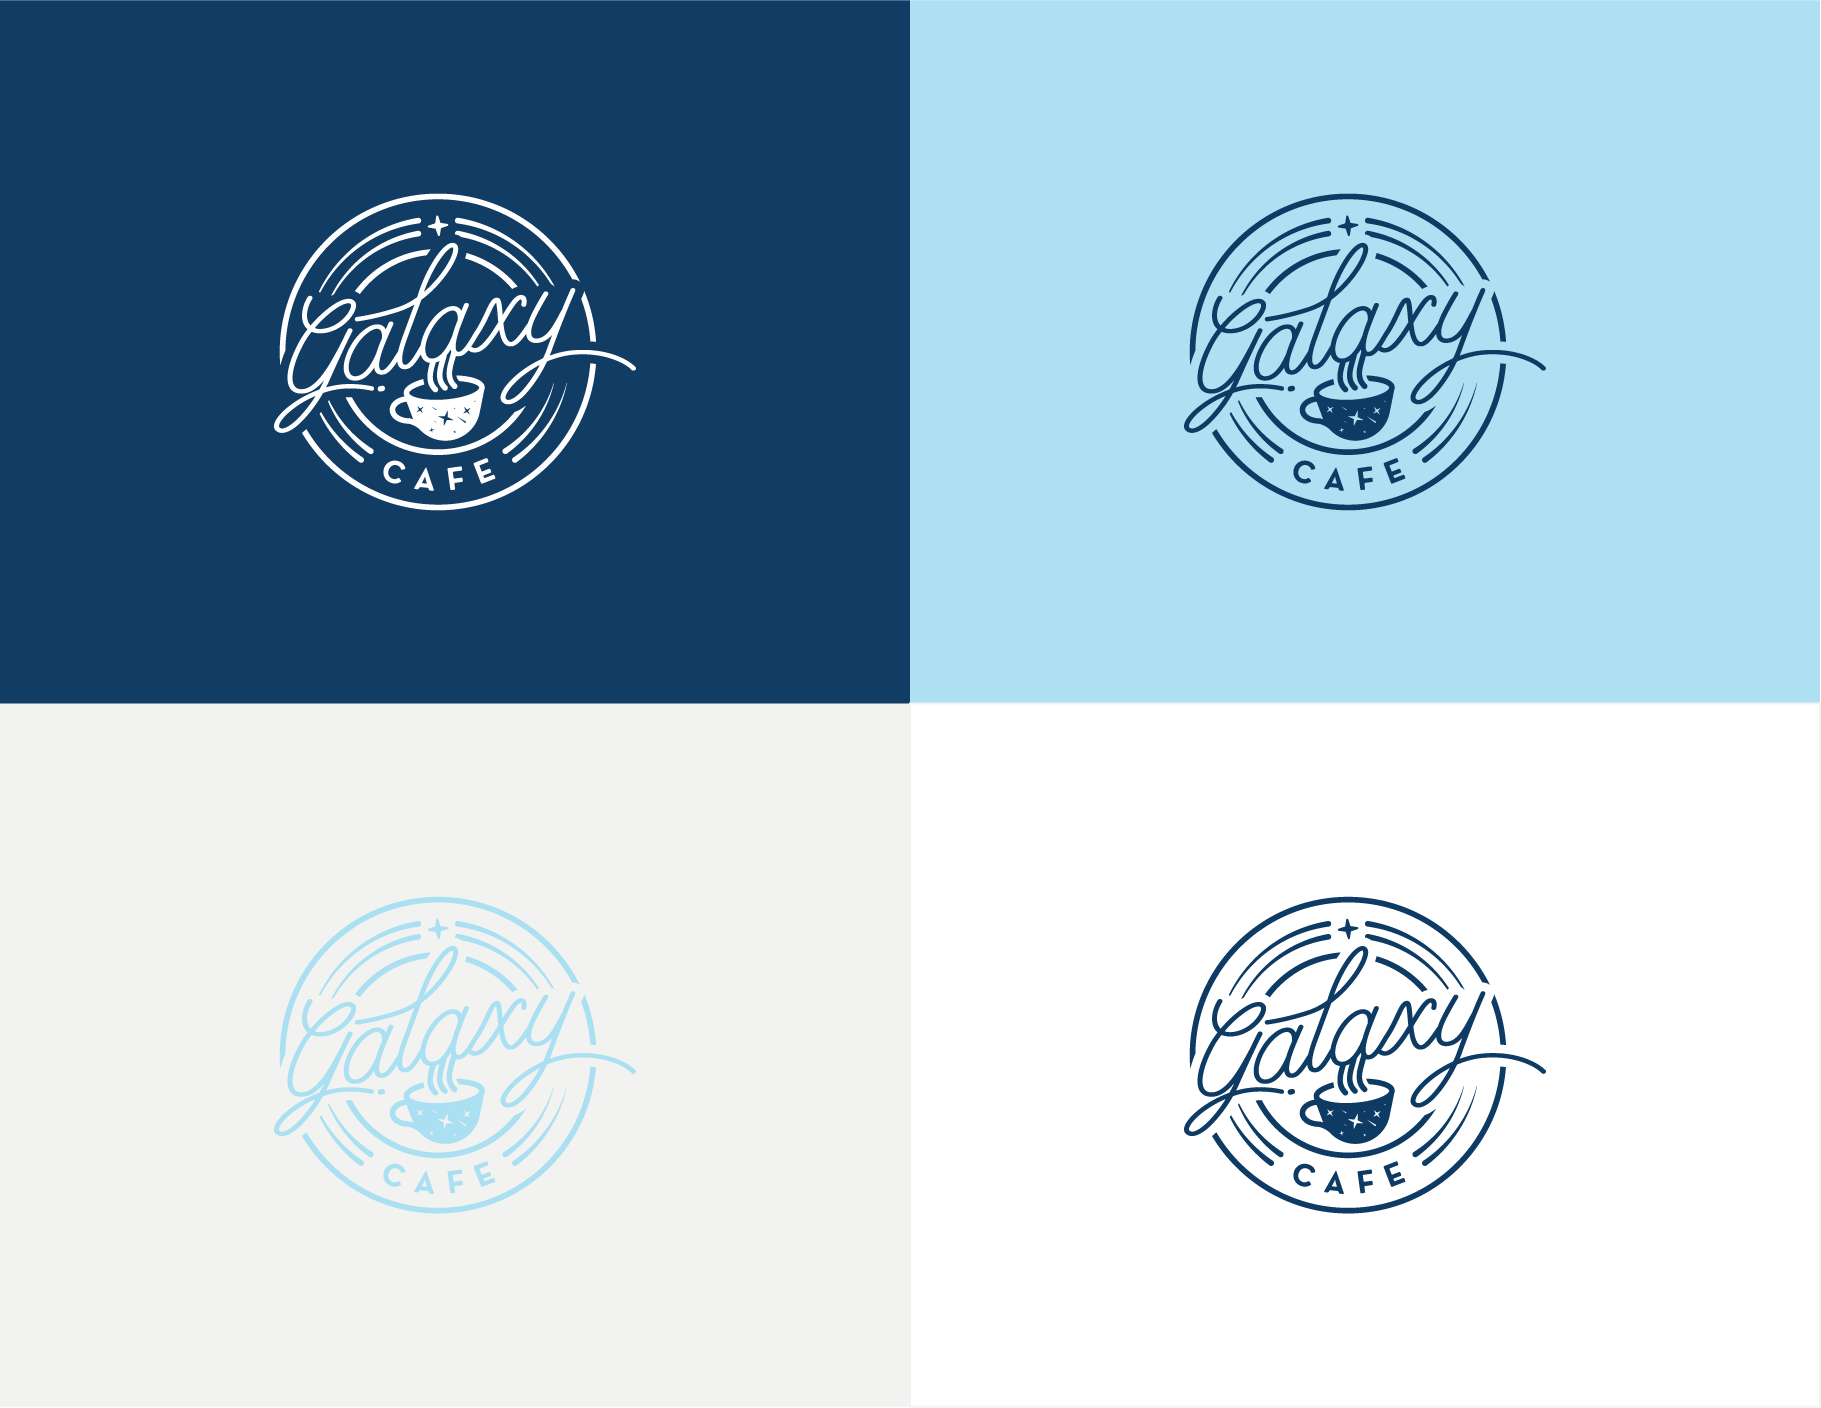 Galaxy Cafe Re-brand Secondary Logo Color Variants